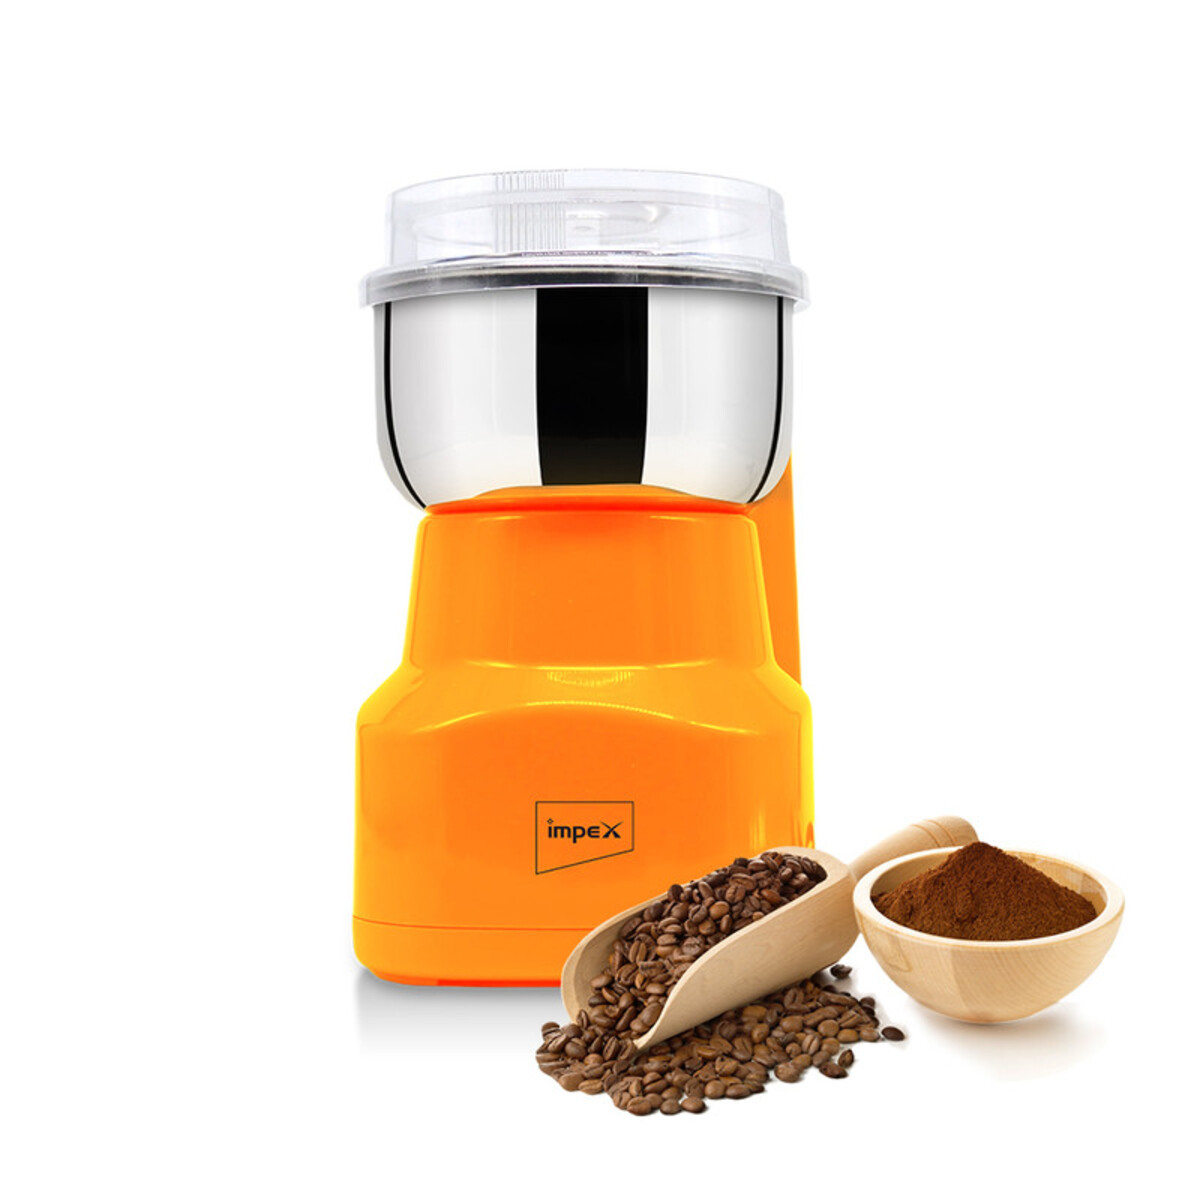 Impex CG 3401 N Coffee Grinder With Overheat protection